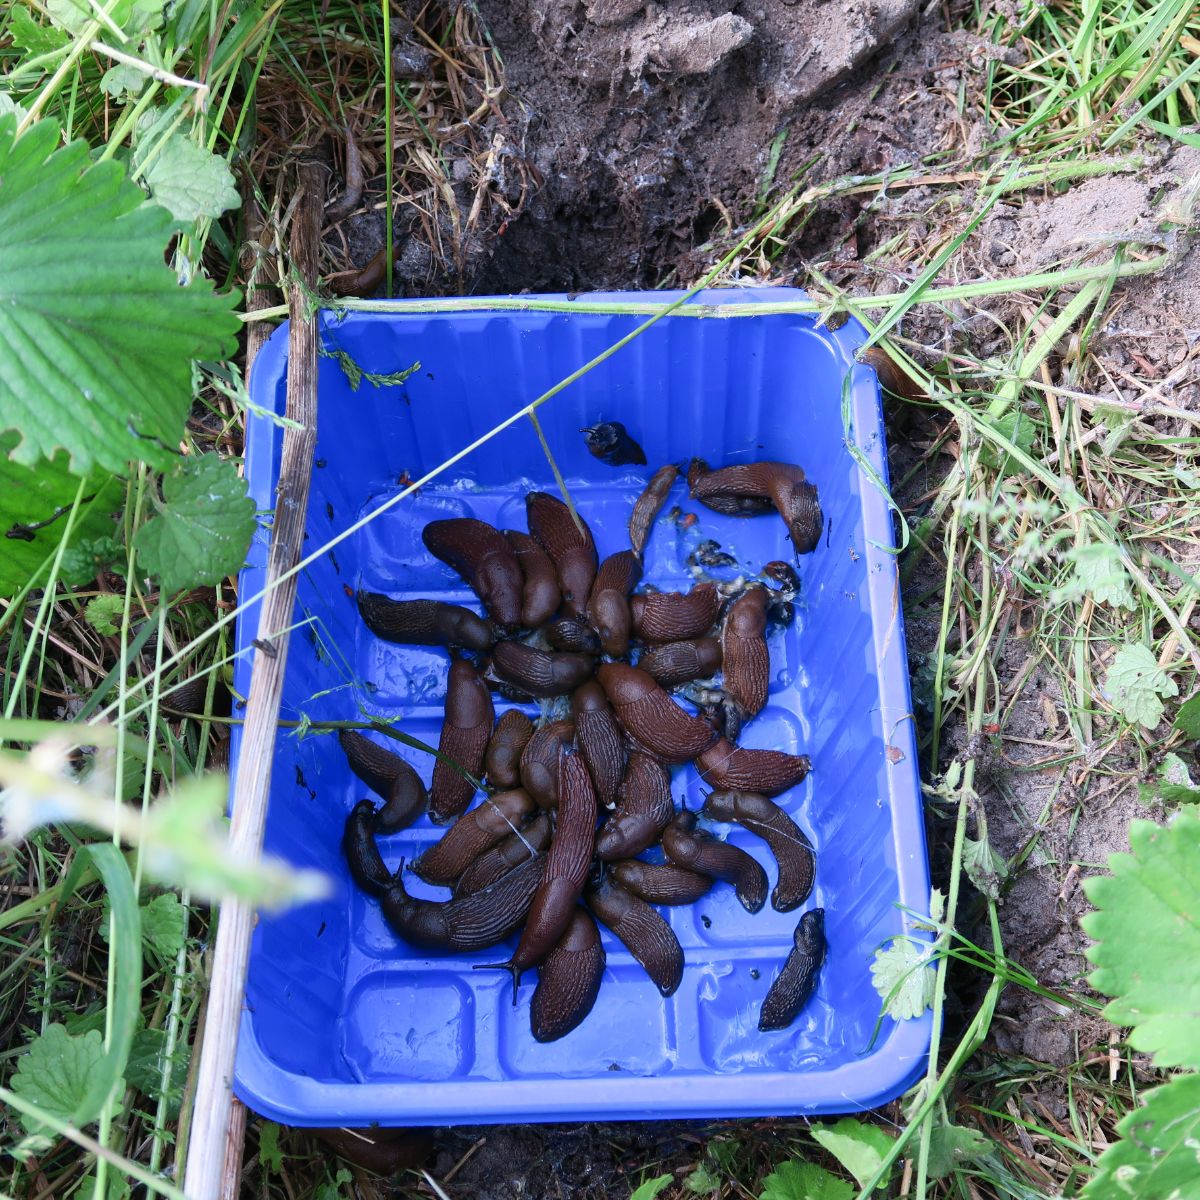 Slugs collected in a container